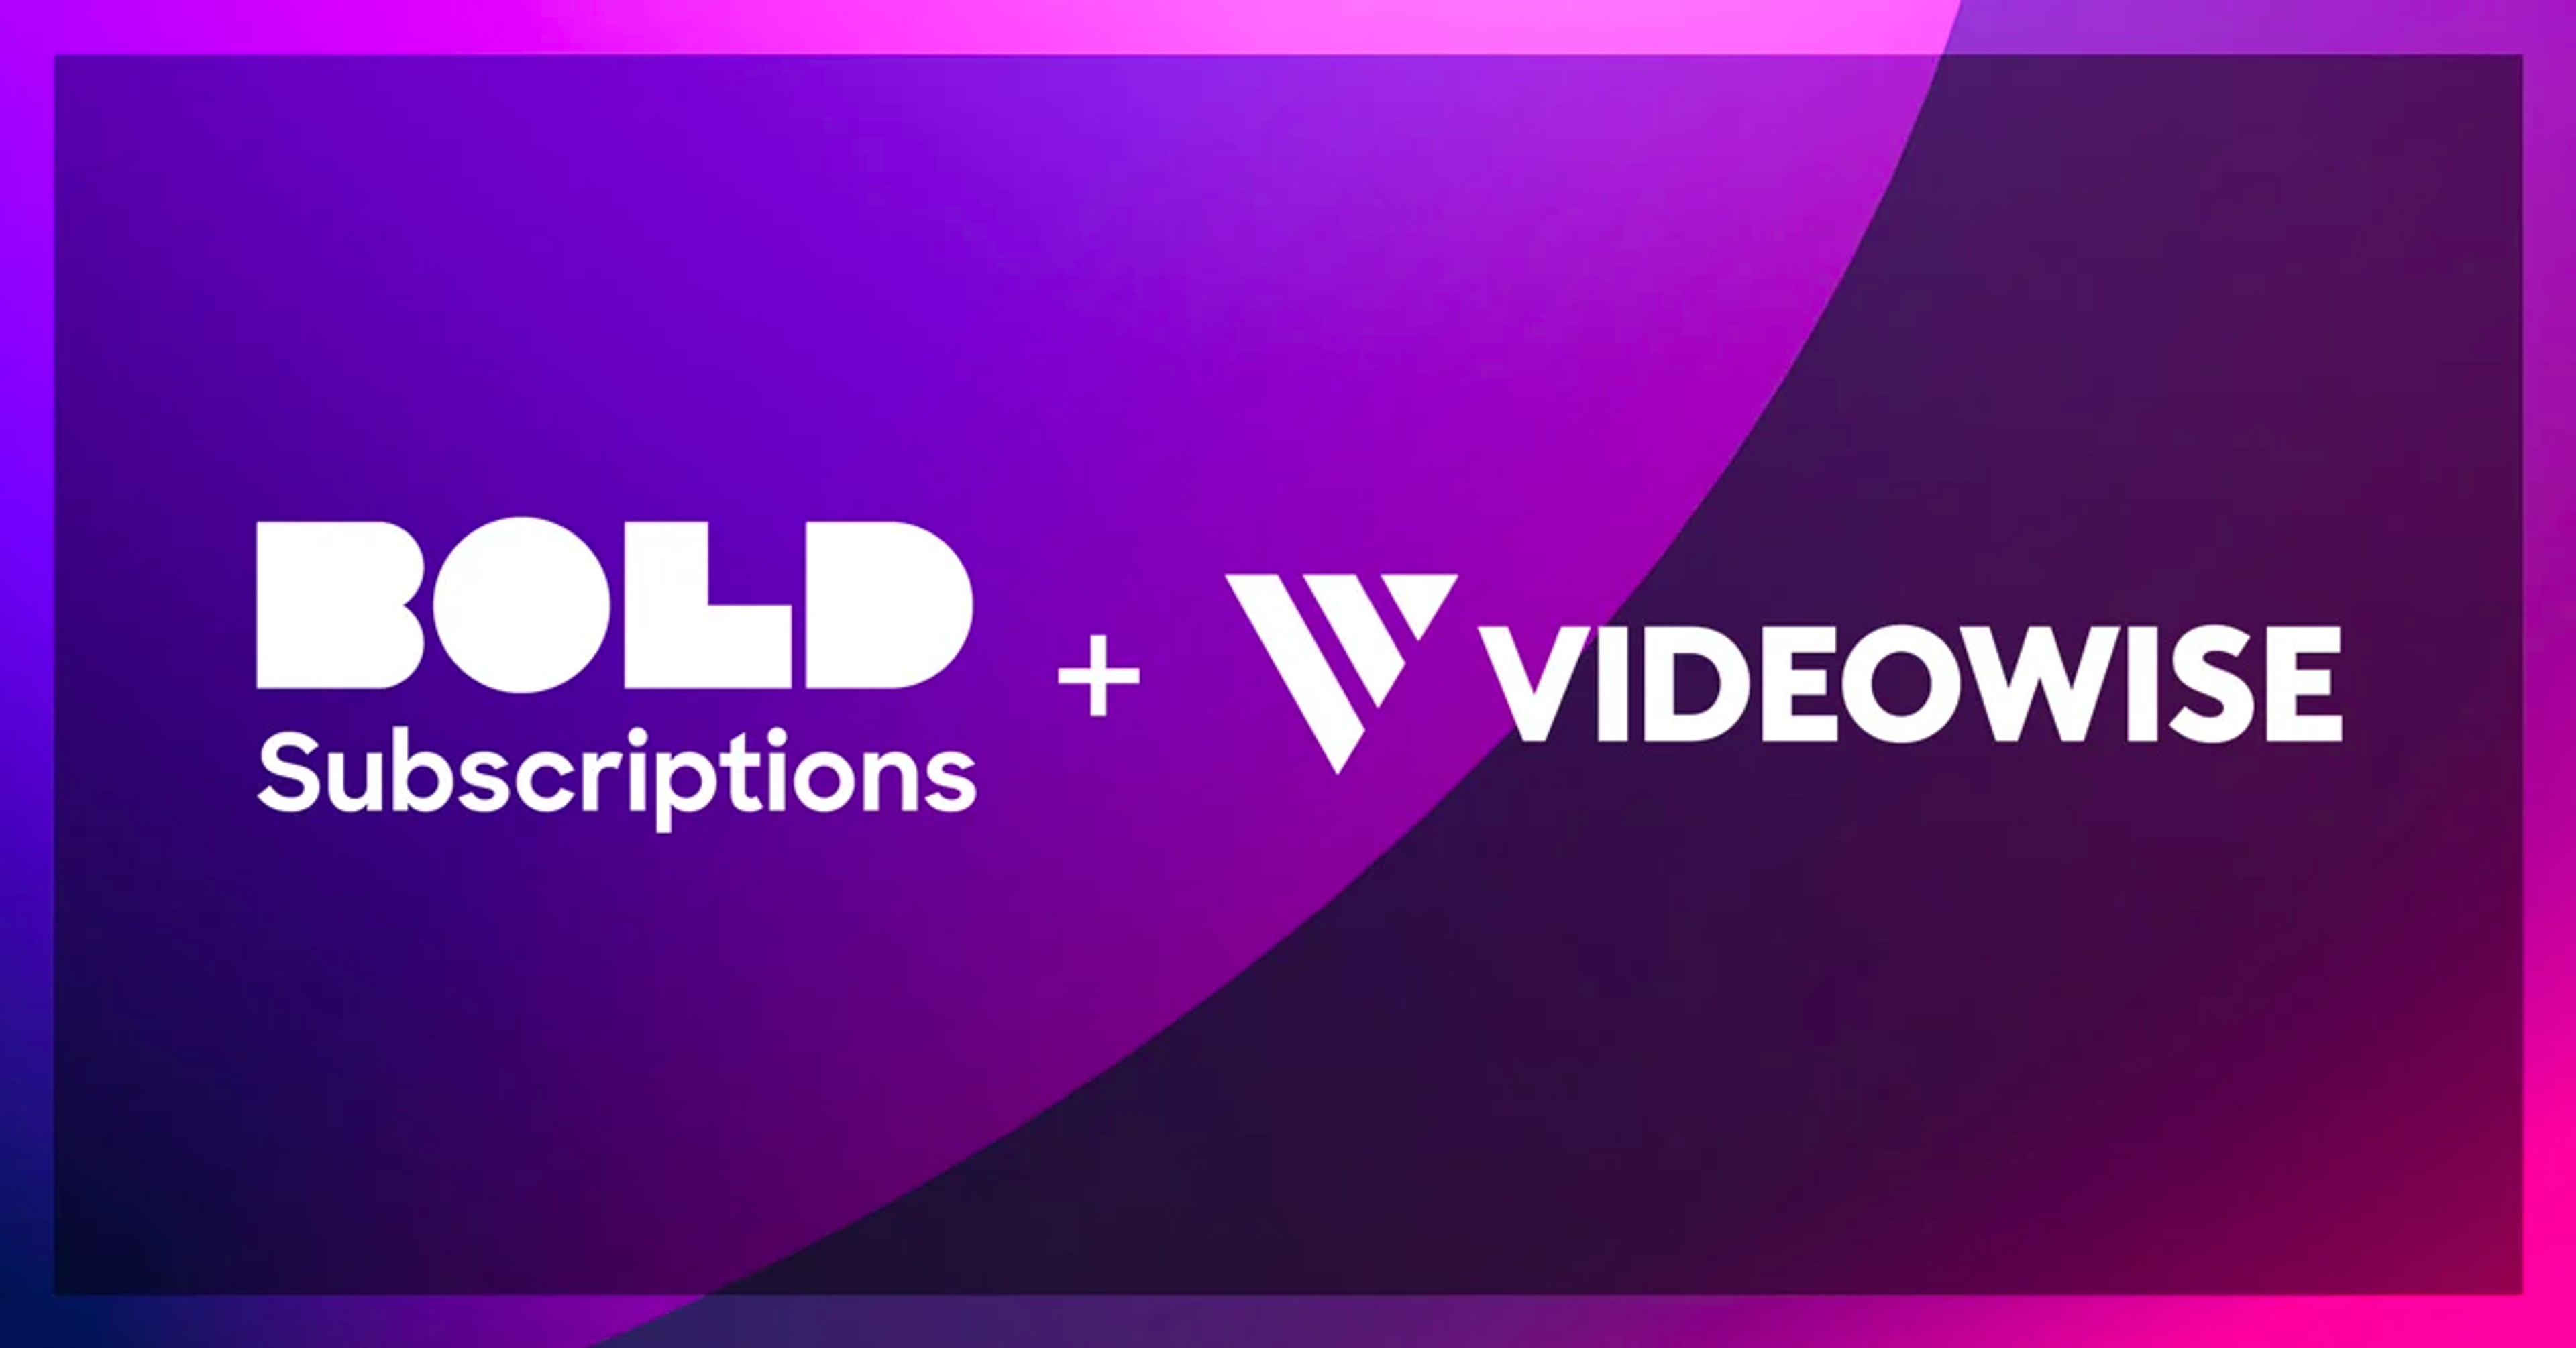 Videowise and Bold Subscriptions logos